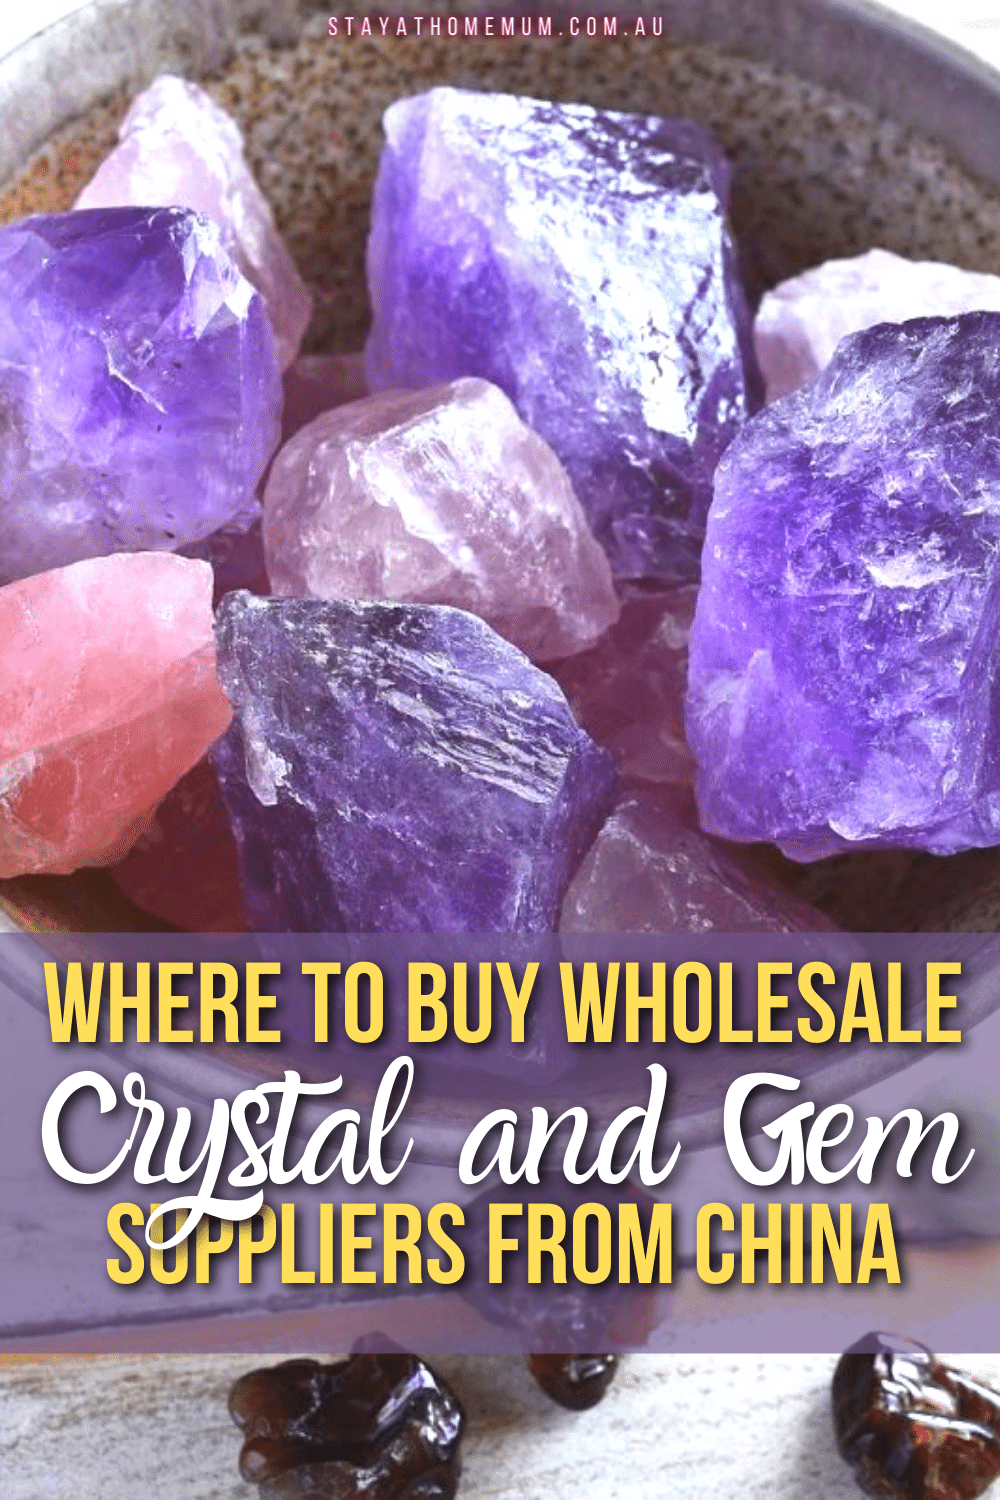 Where to Buy Wholesale Crystal and Gem Suppliers from China | Stay At Home Mum